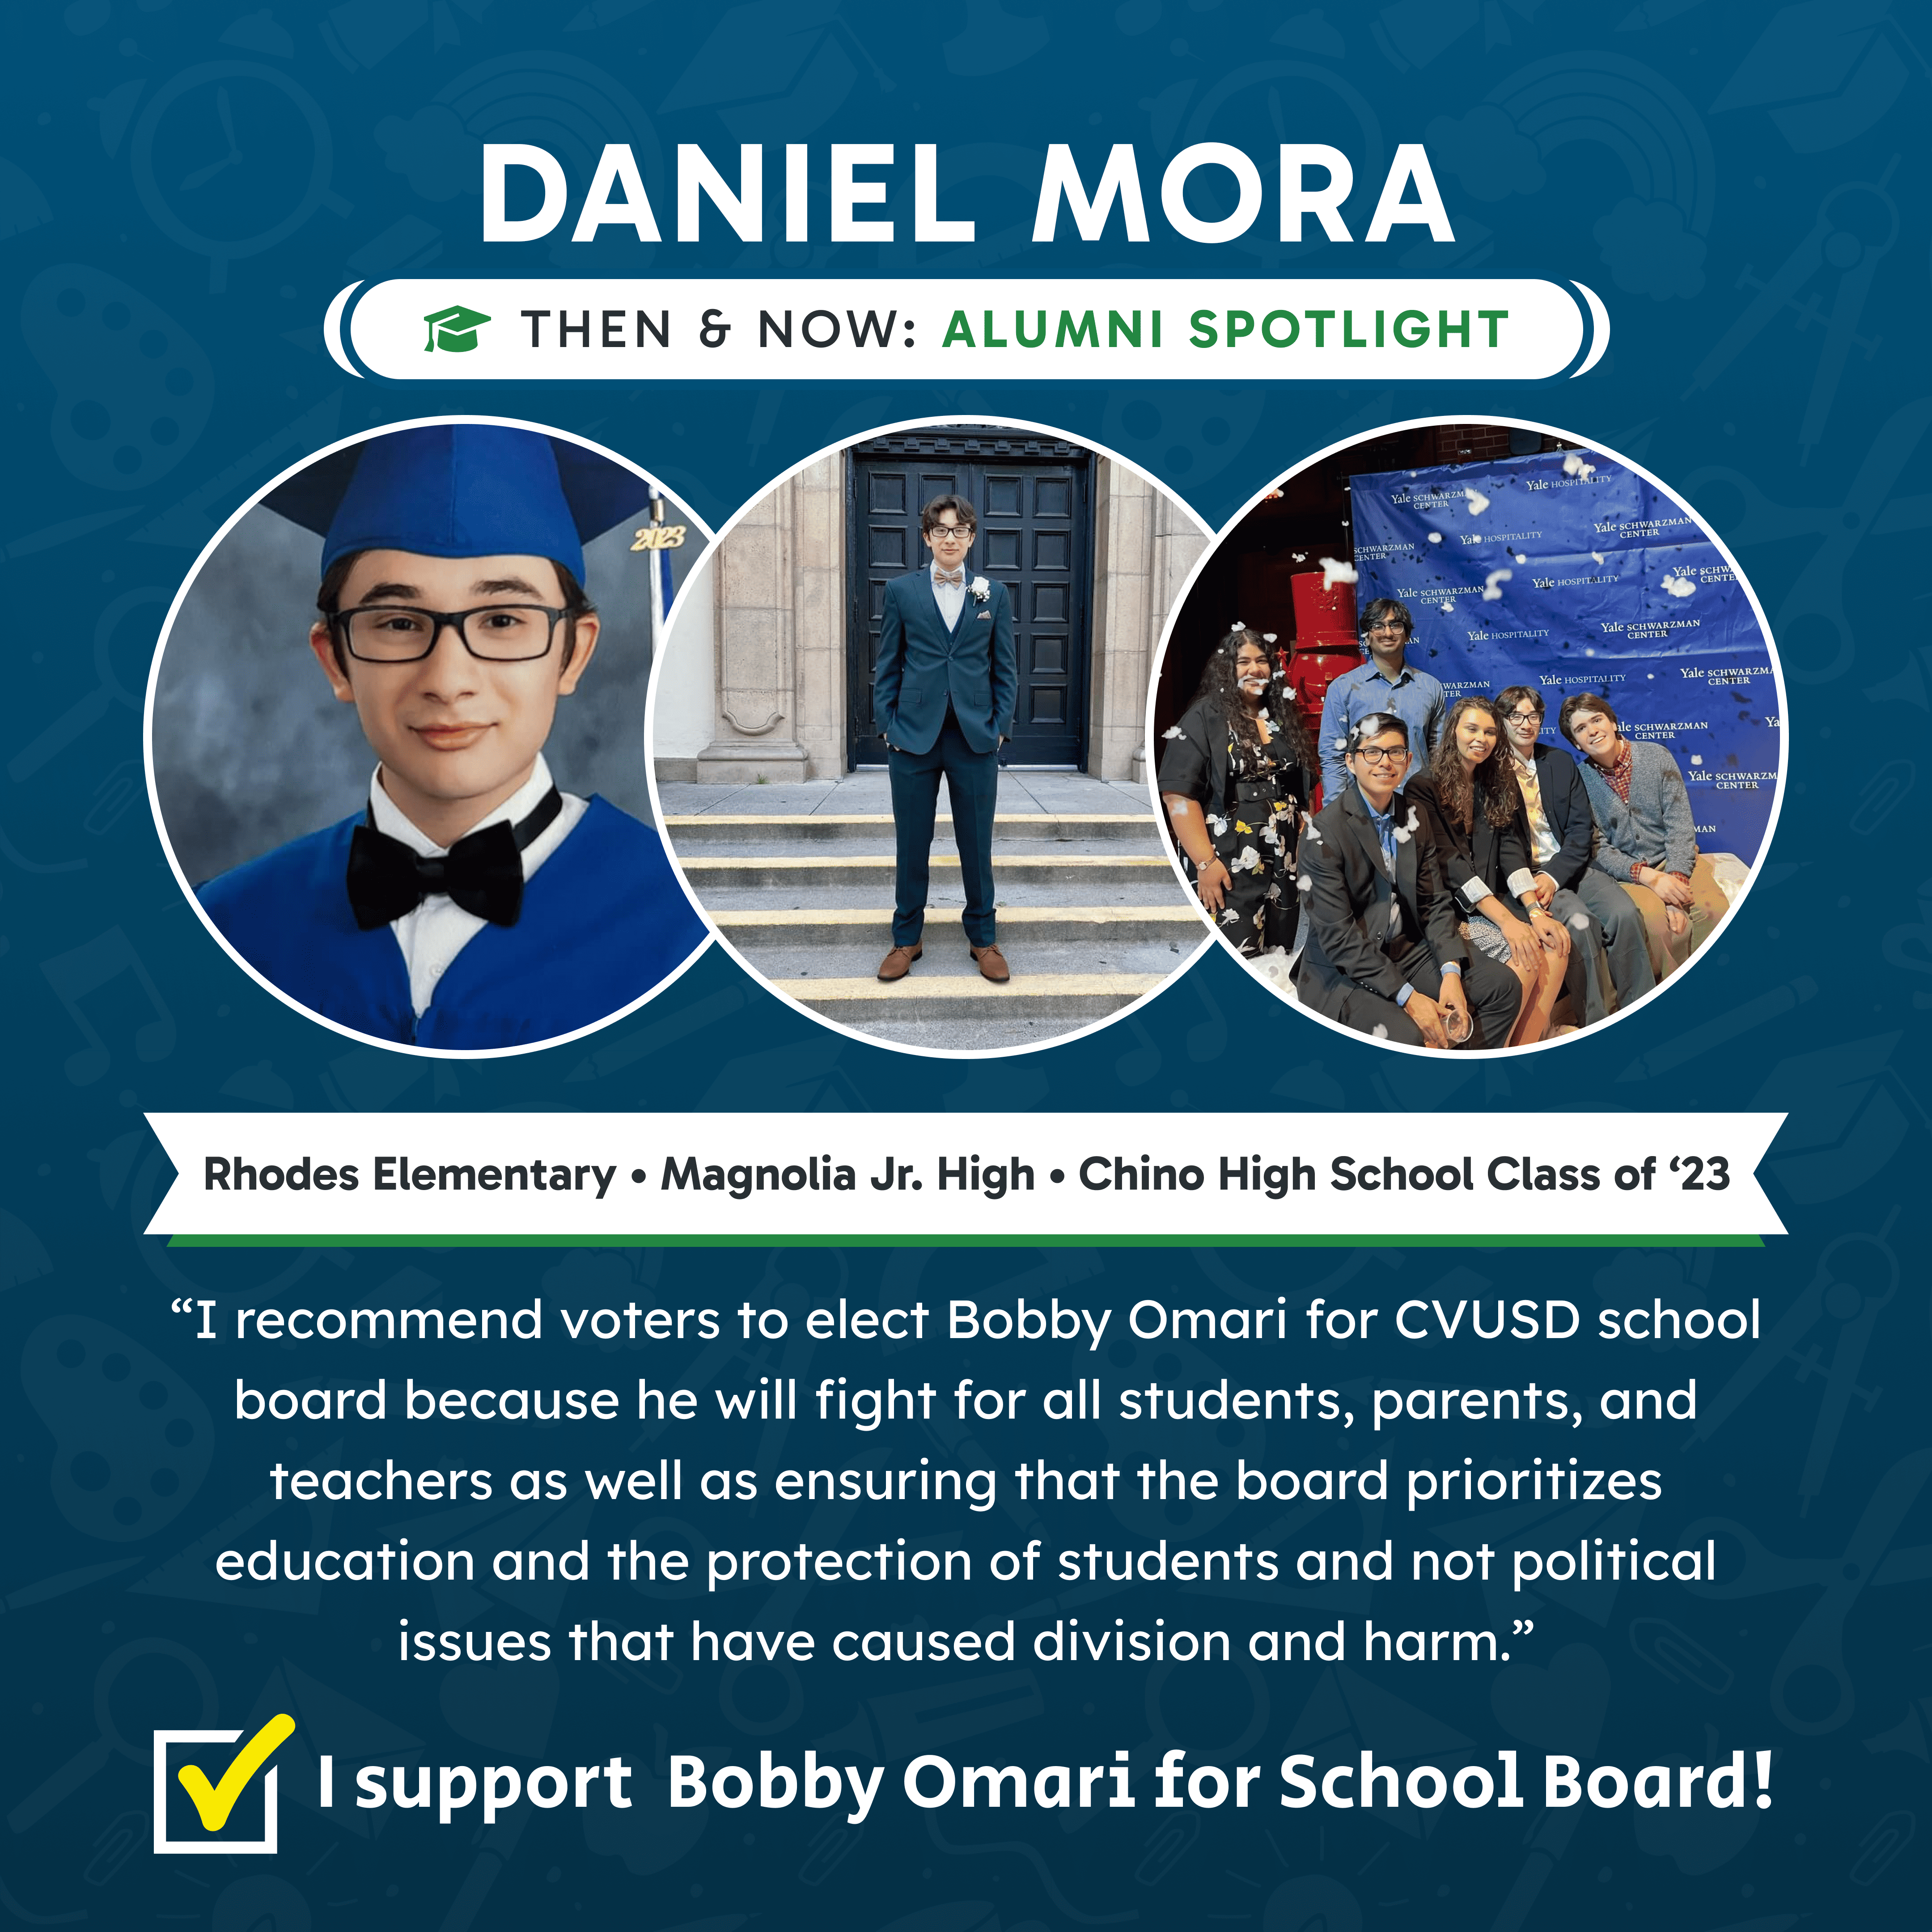 former chino valley student daniel mora who supports bobby omari for chino valley school board. He is wearing his graduation outfit, standing at the steps of Yale University, and sitting with friends at a Yale event.